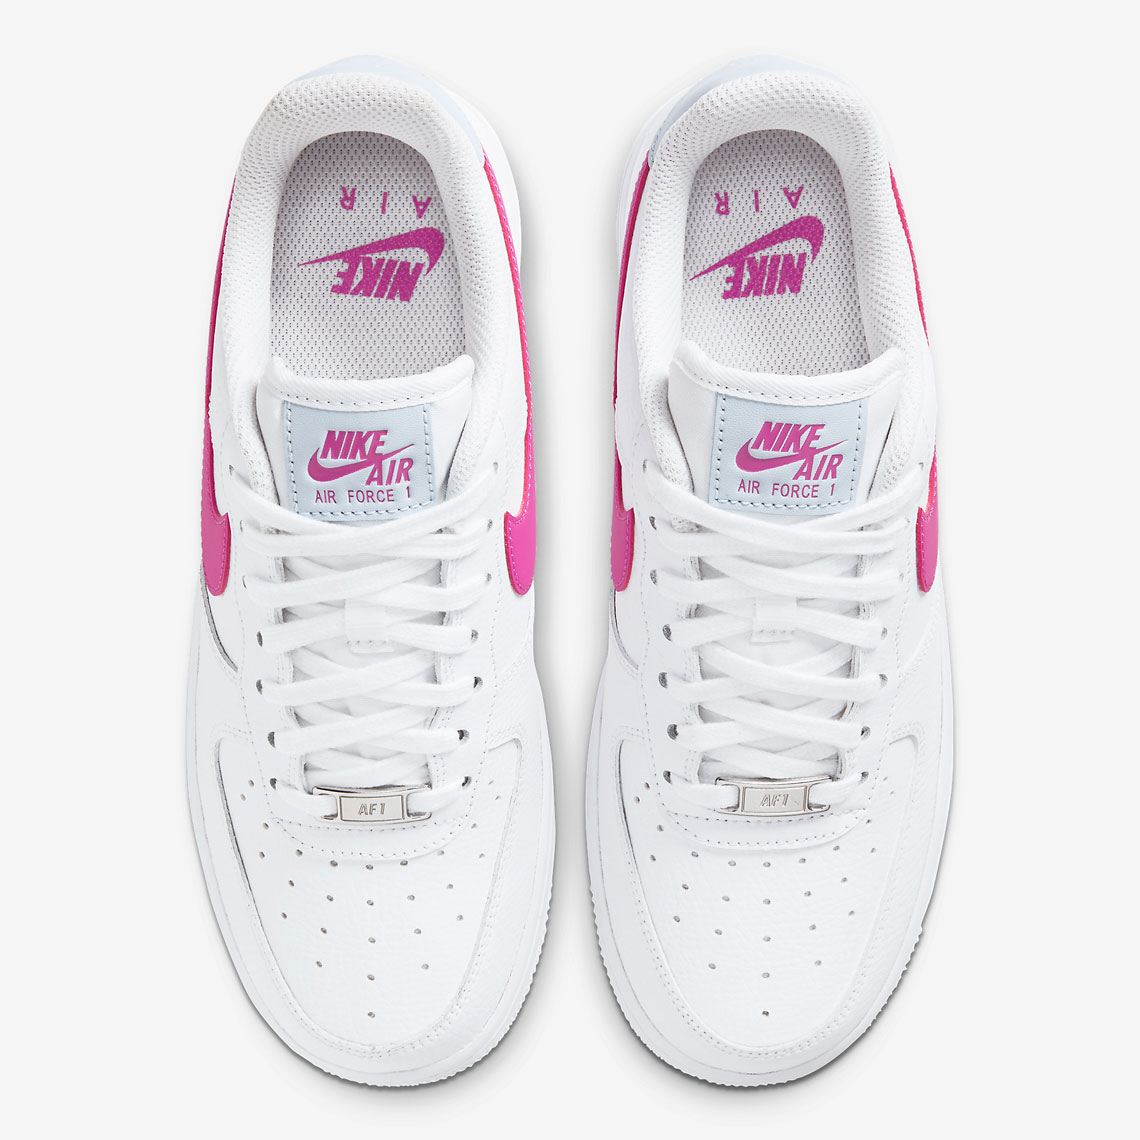 Nike Air Force 1 Low WMNS Fire Pink CT4328-101 | SneakerNews.com